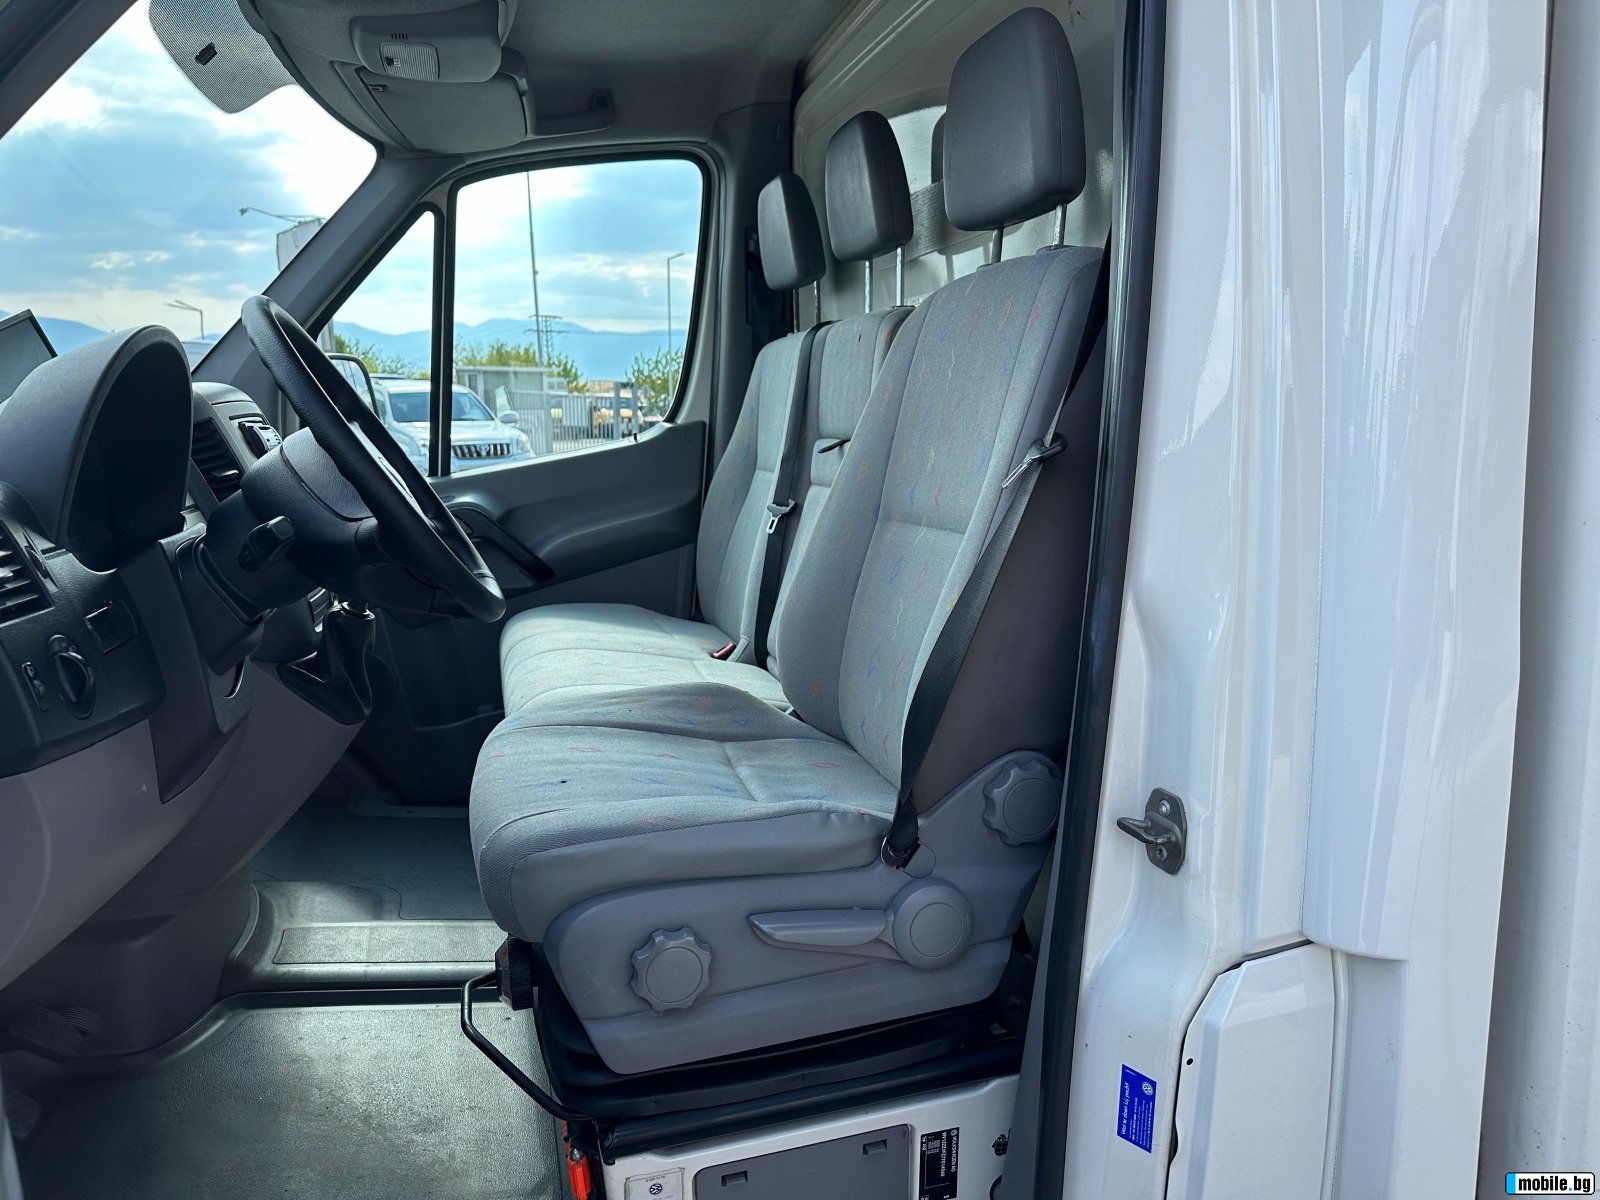 VW Crafter  3,5t. 4,33. 163..   +   | Mobile.bg   9